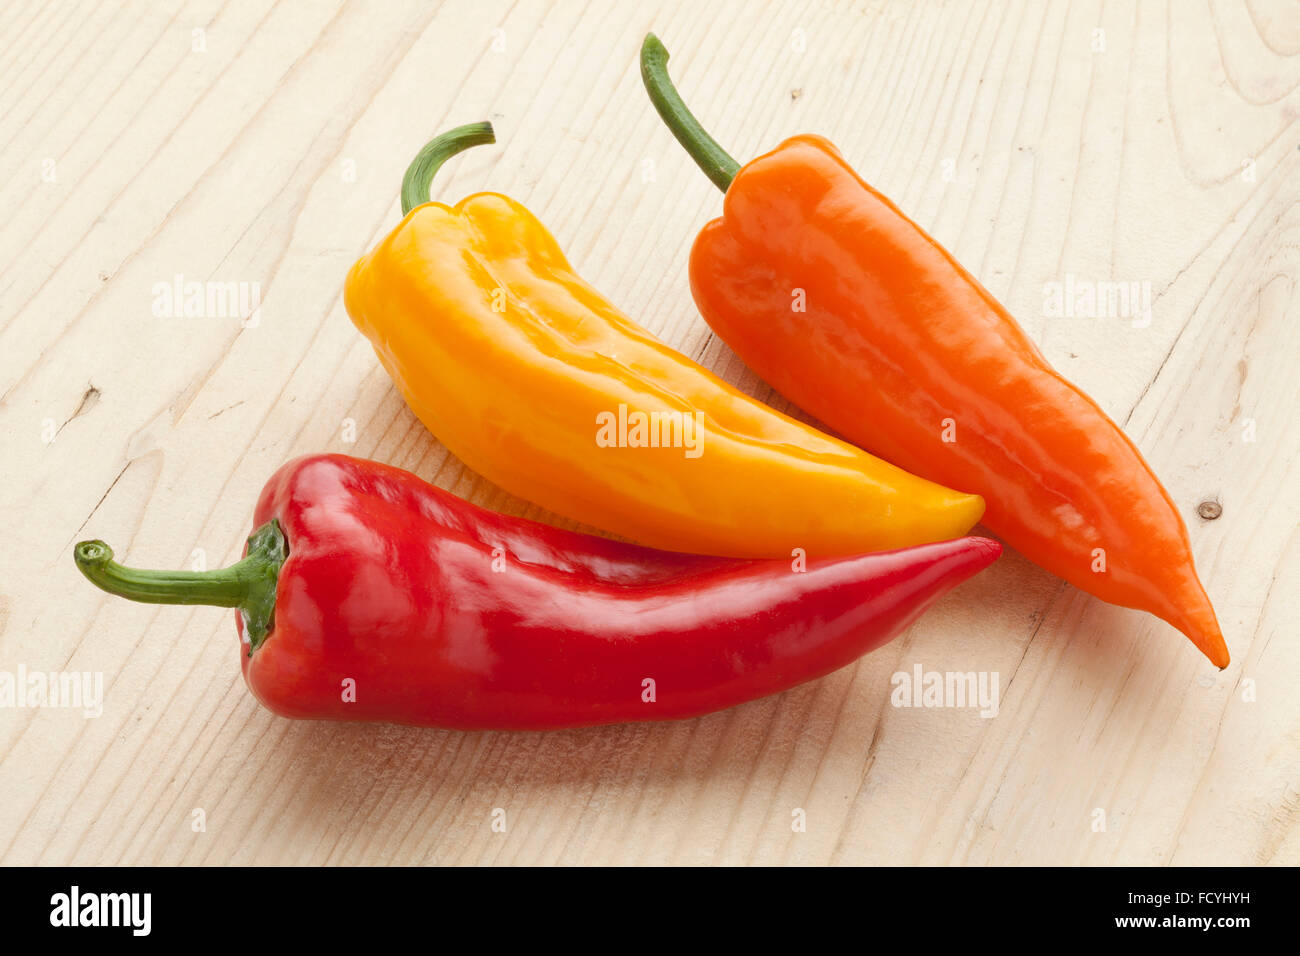 Fresh sweet red, yellow and orange pointed bell peppers Stock Photo